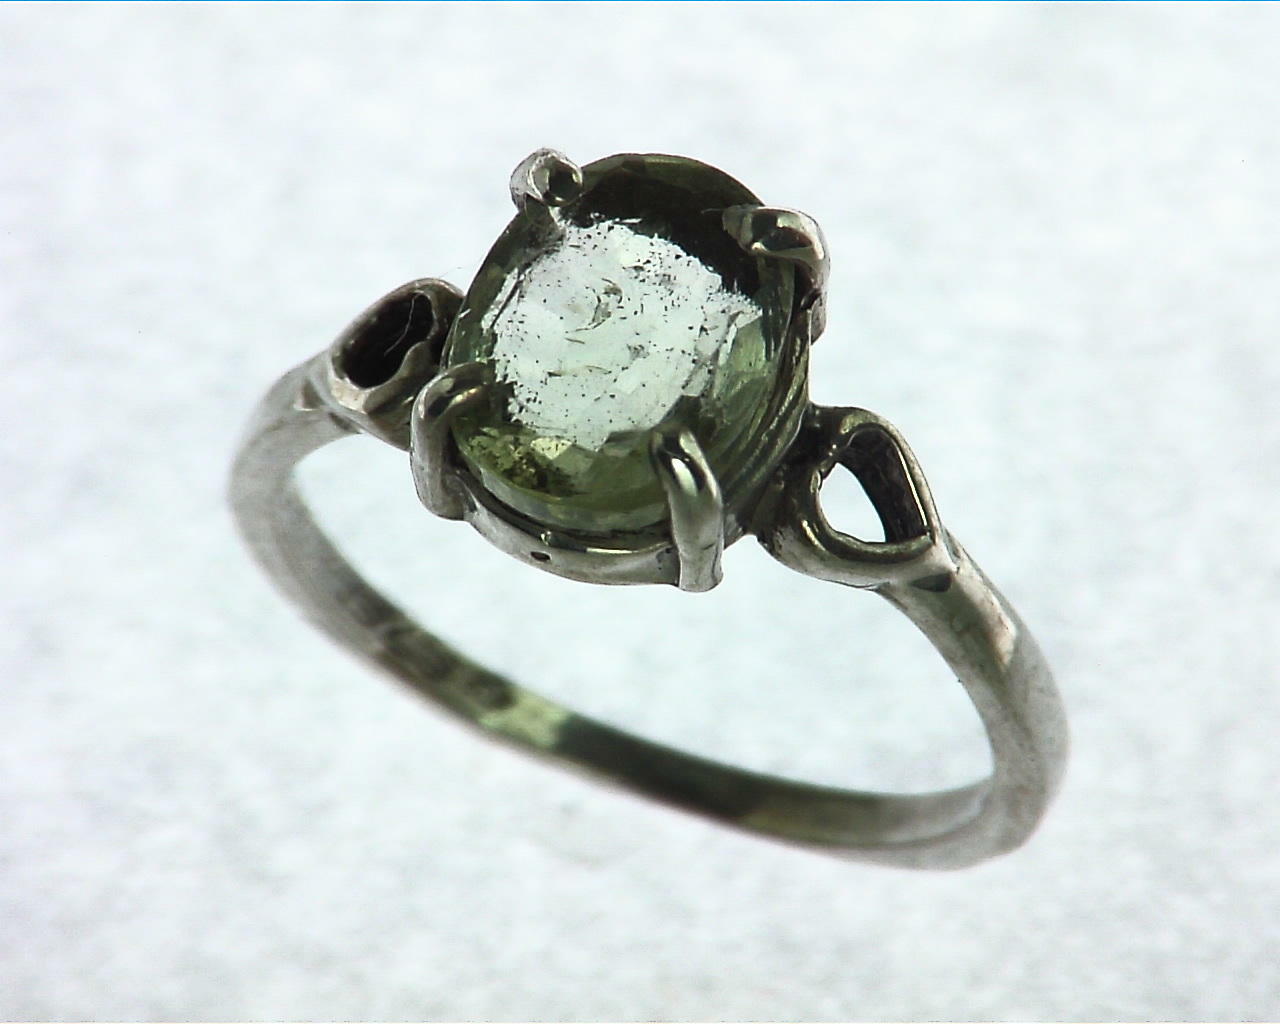 Green Tourmaline Sterling Silver Ring